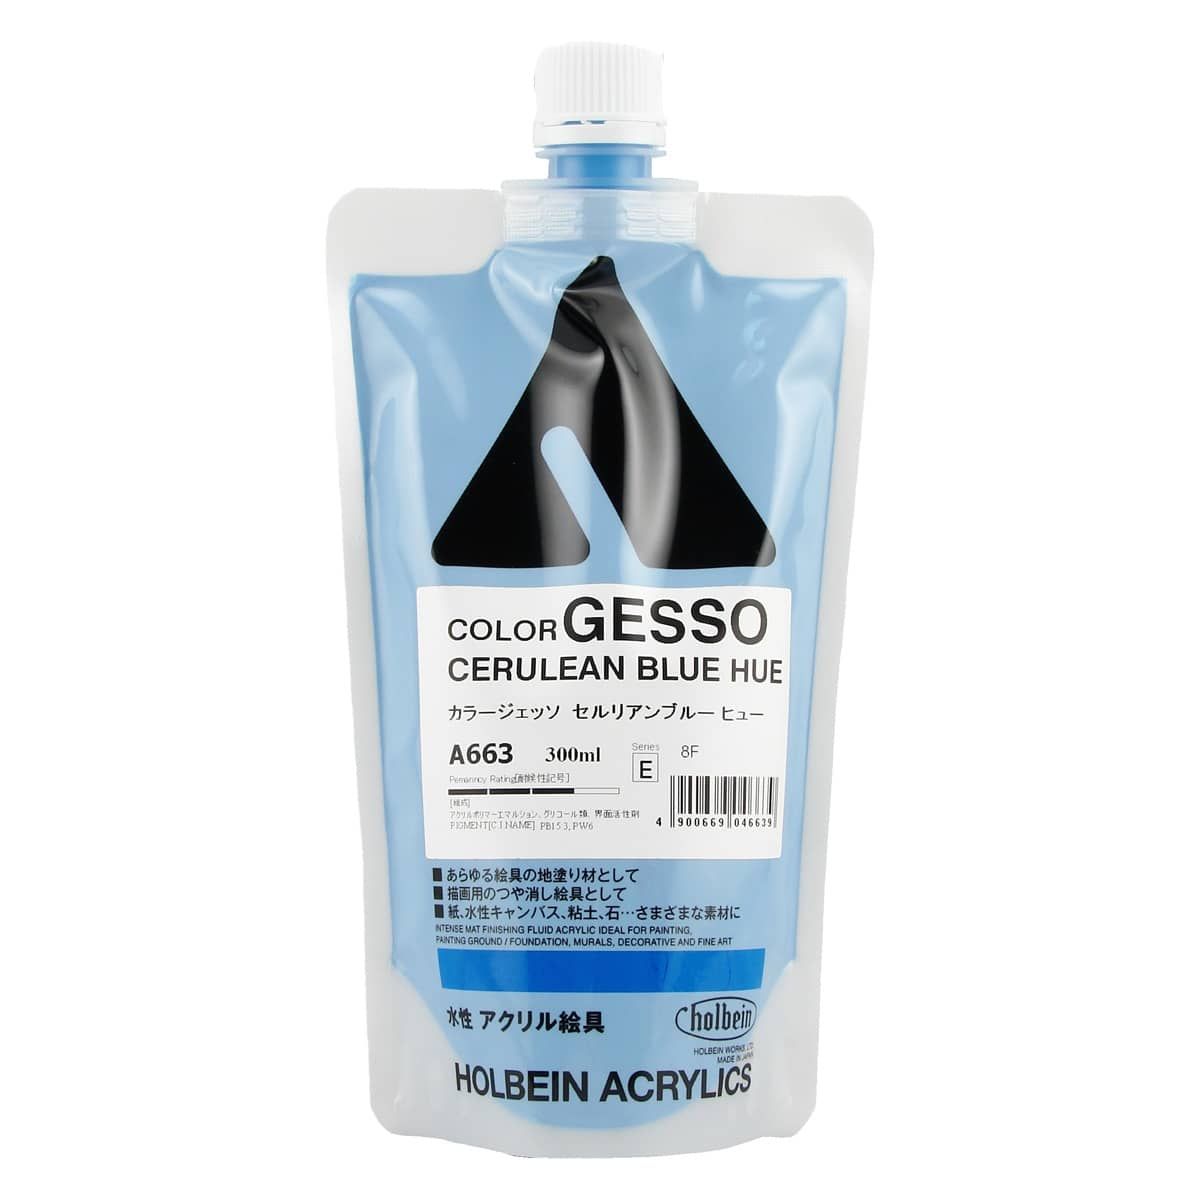 Holbein Acrylic Colored Gesso 300ml Cerulean Blue Hue